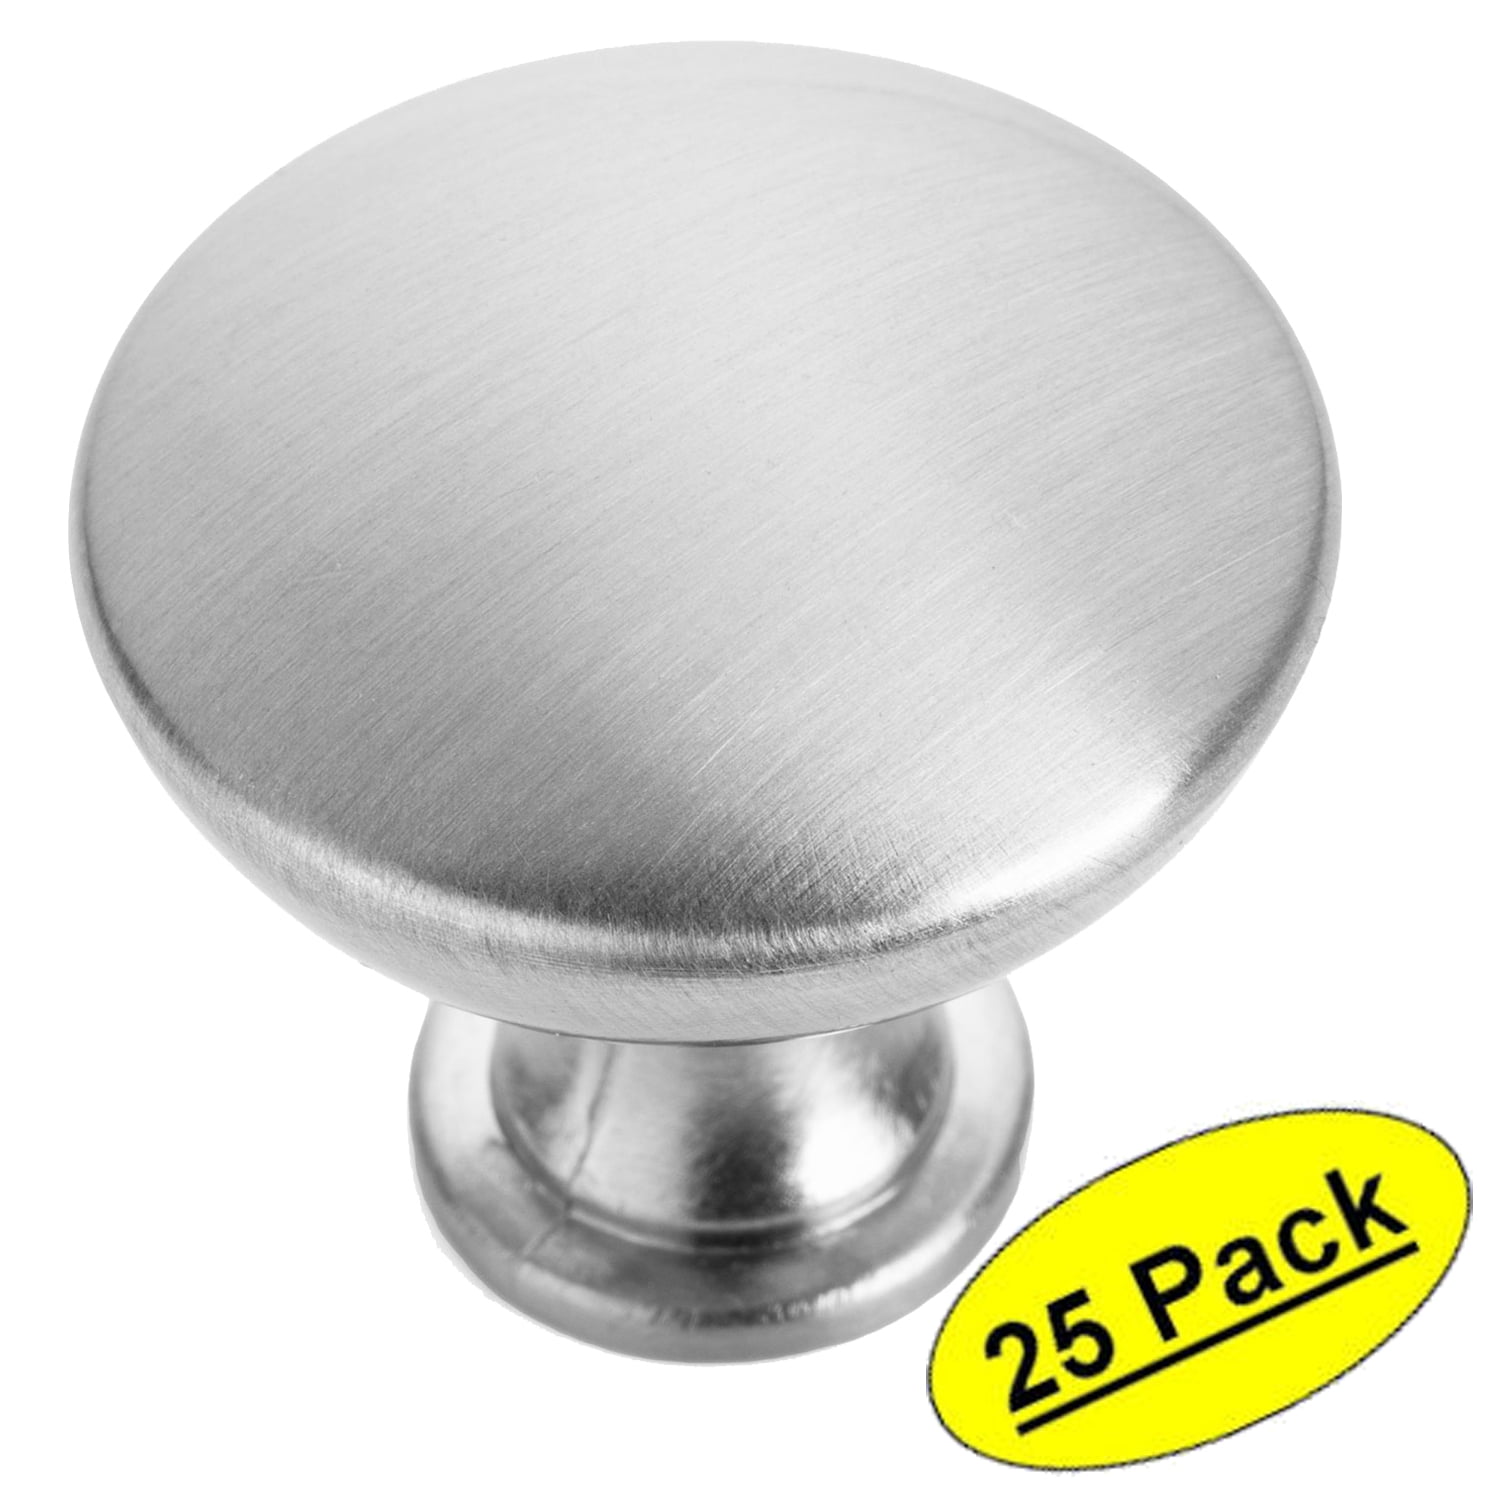 *5 Pack* Cosmas Cabinet Hardware Antique Silver Round Cabinet Knobs #4539AS 